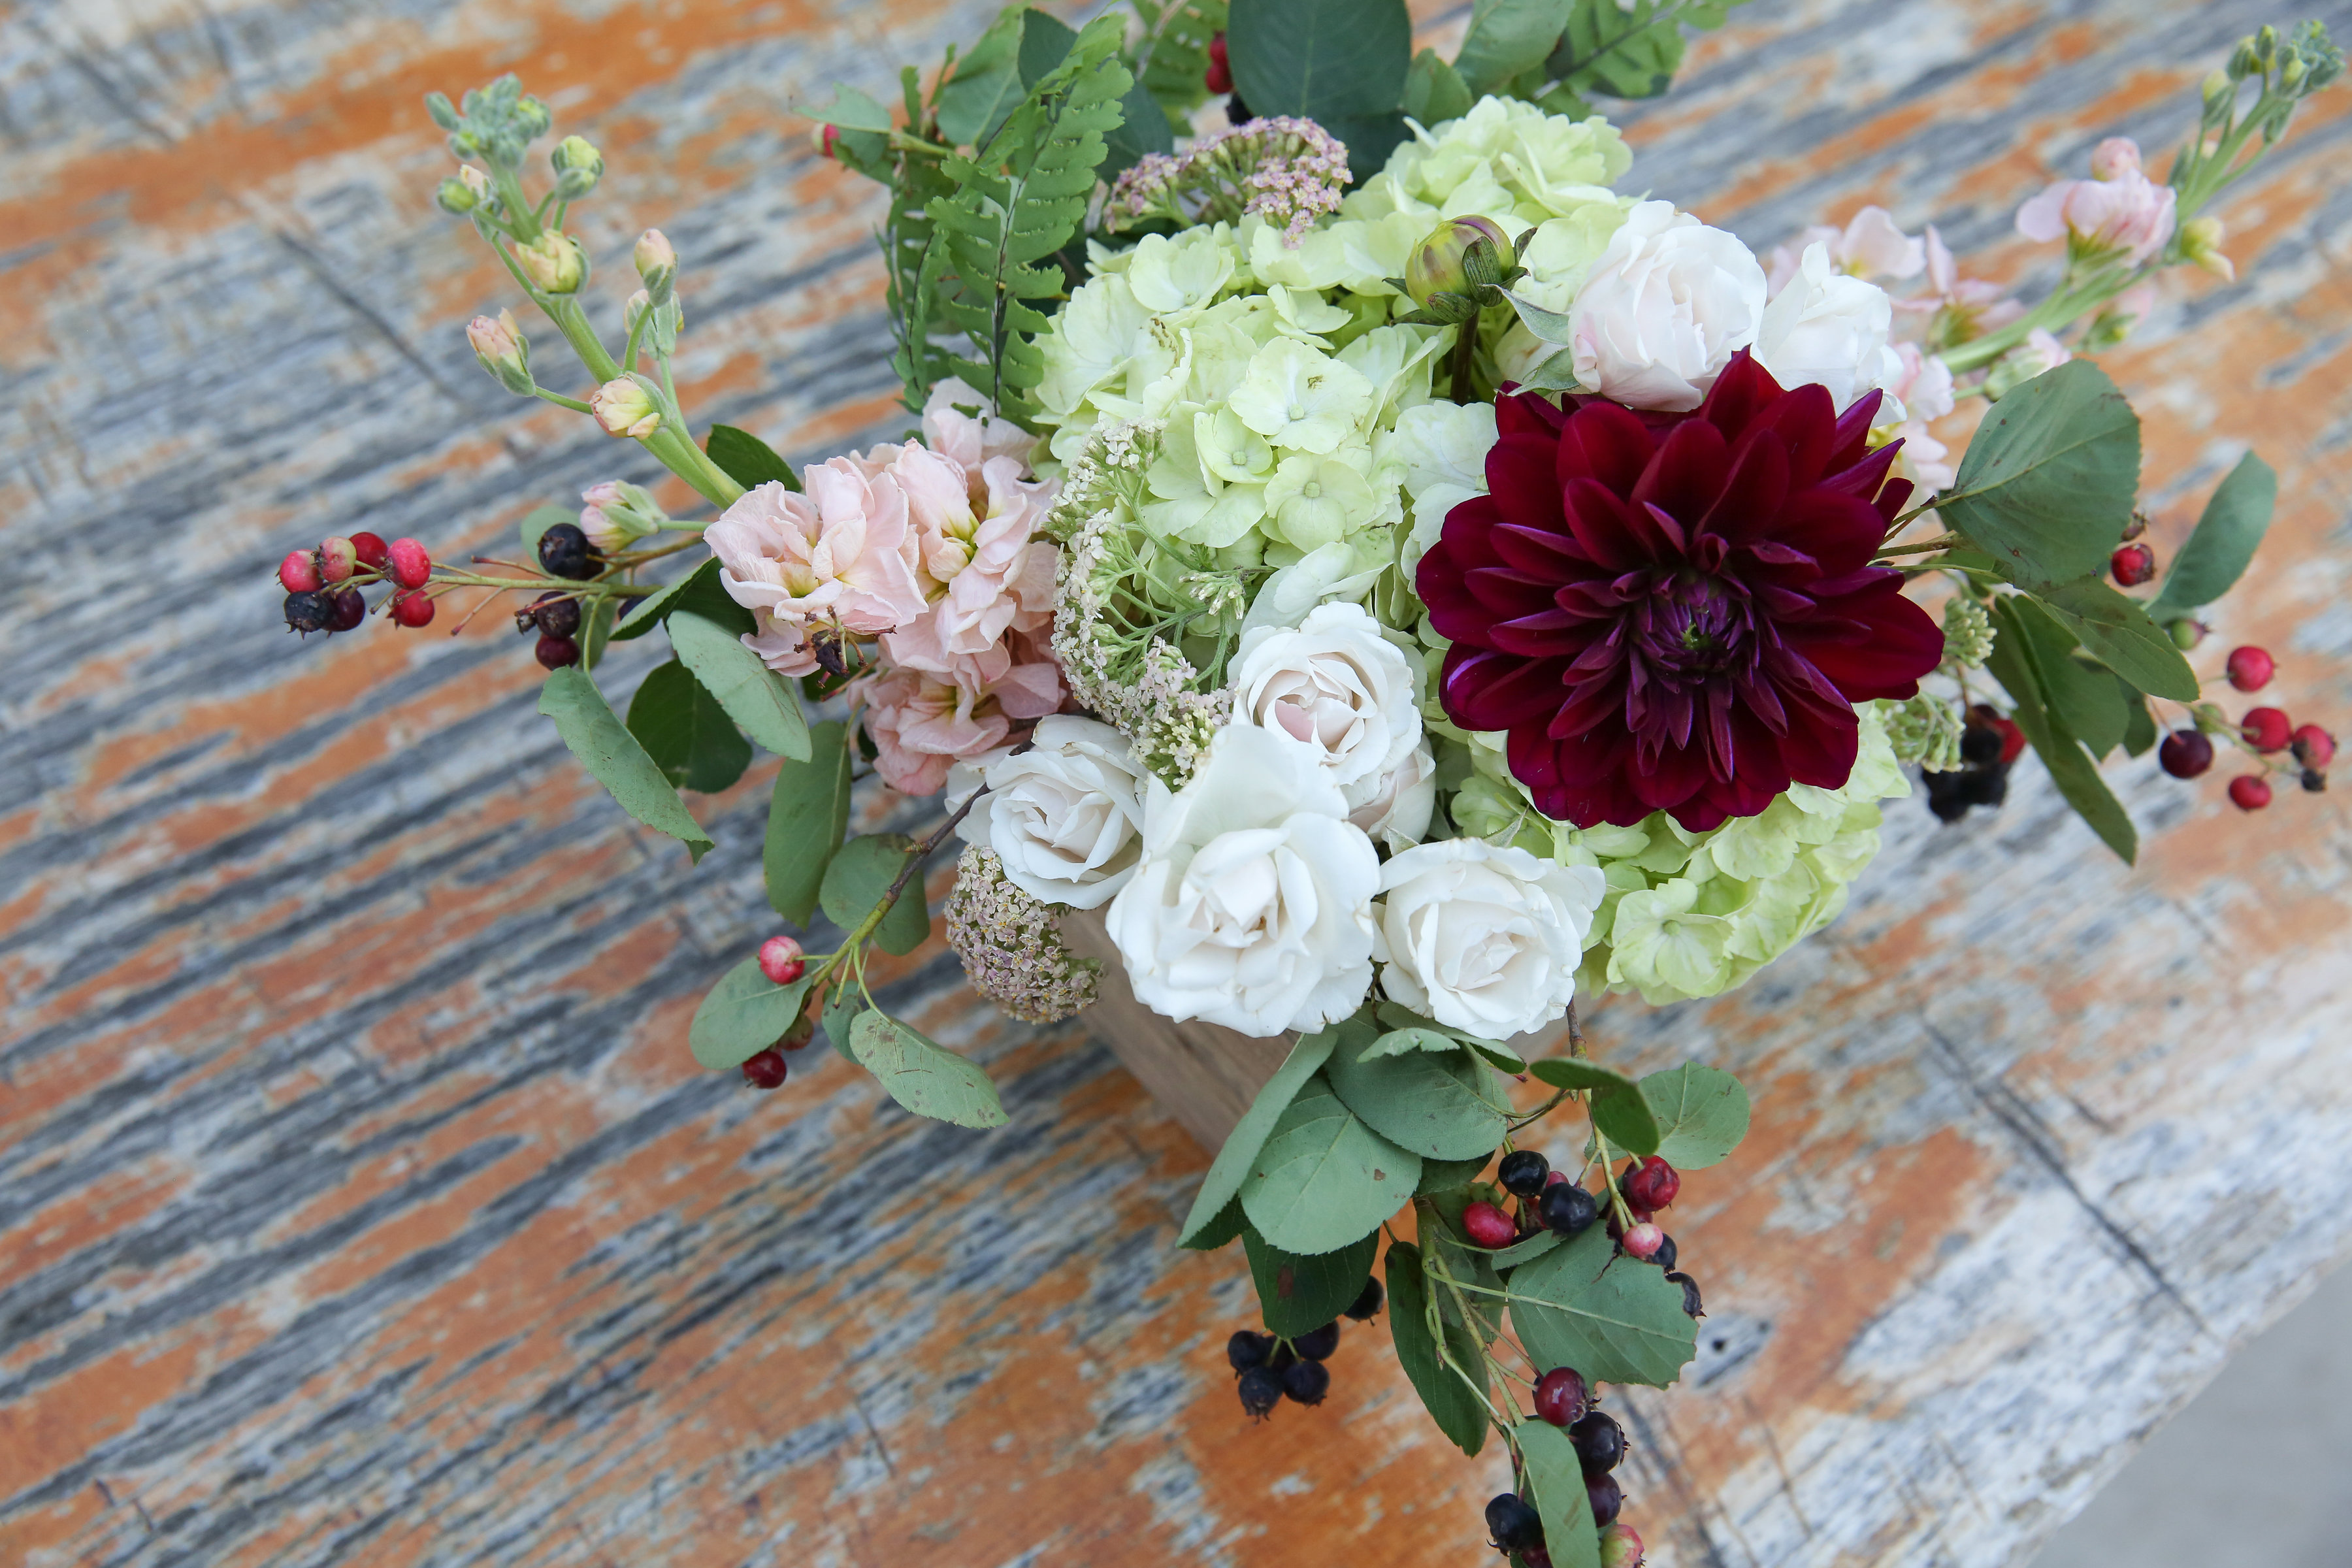 Early summer wedding loose arrangement of dahlias, stock, white majolica, berries, and green hydrangea.